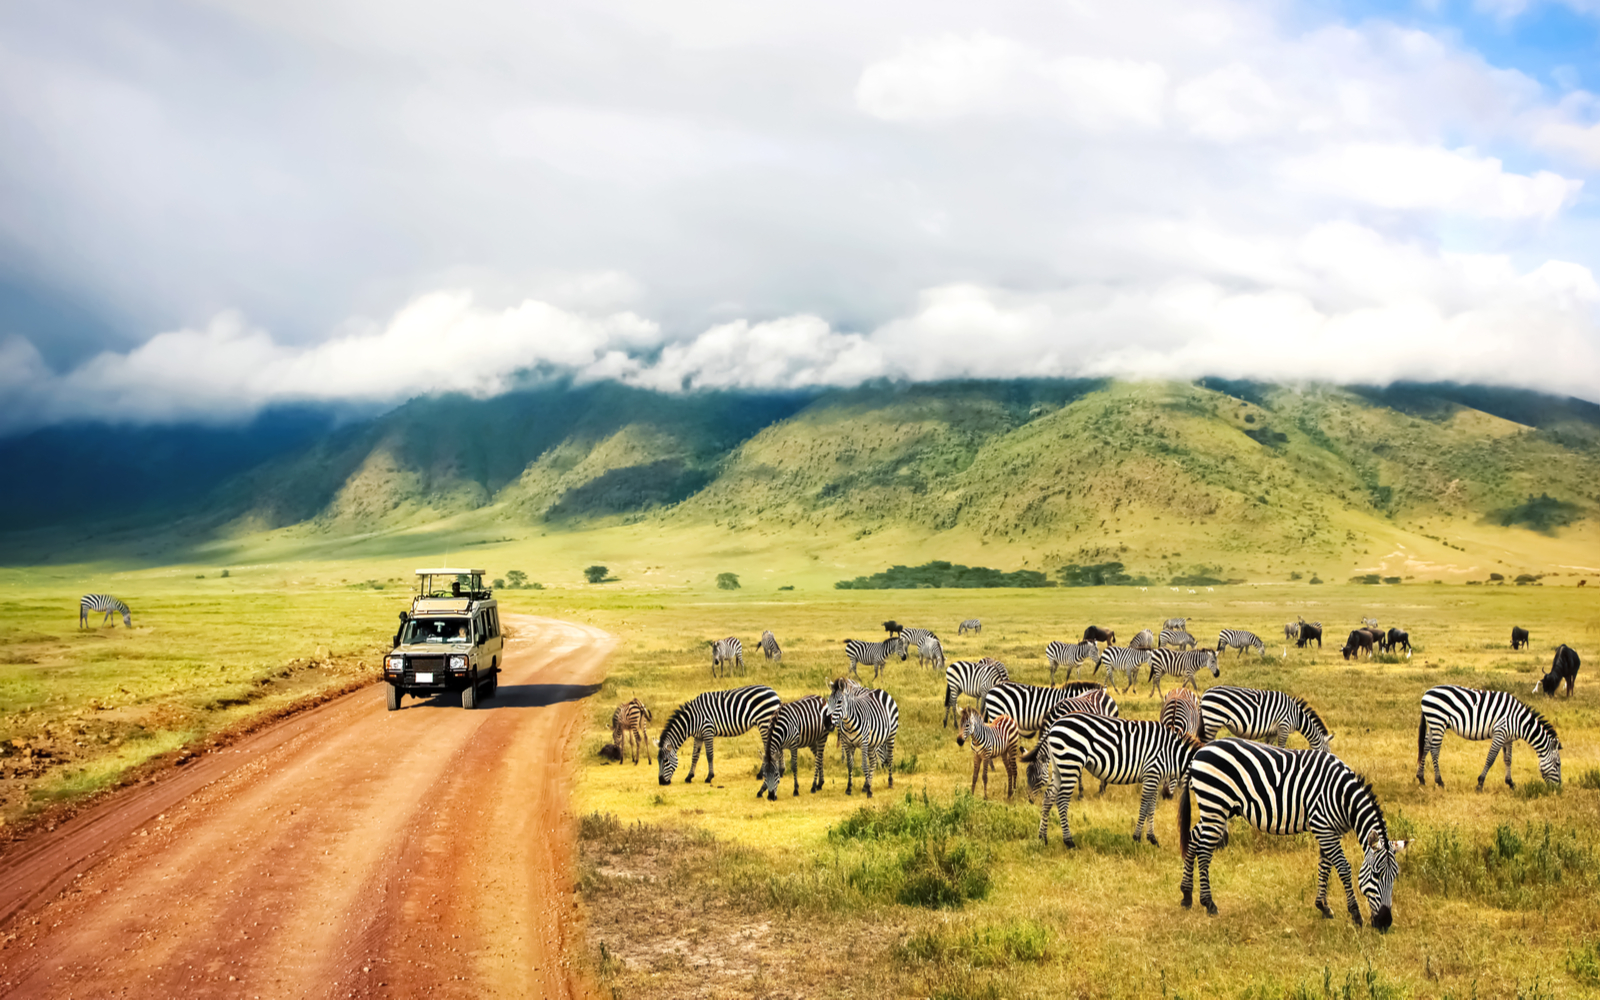 Land rover taking folks on one of the best Safaris in Africa with clouds over the Ngorongoro Crater and zebras in the field